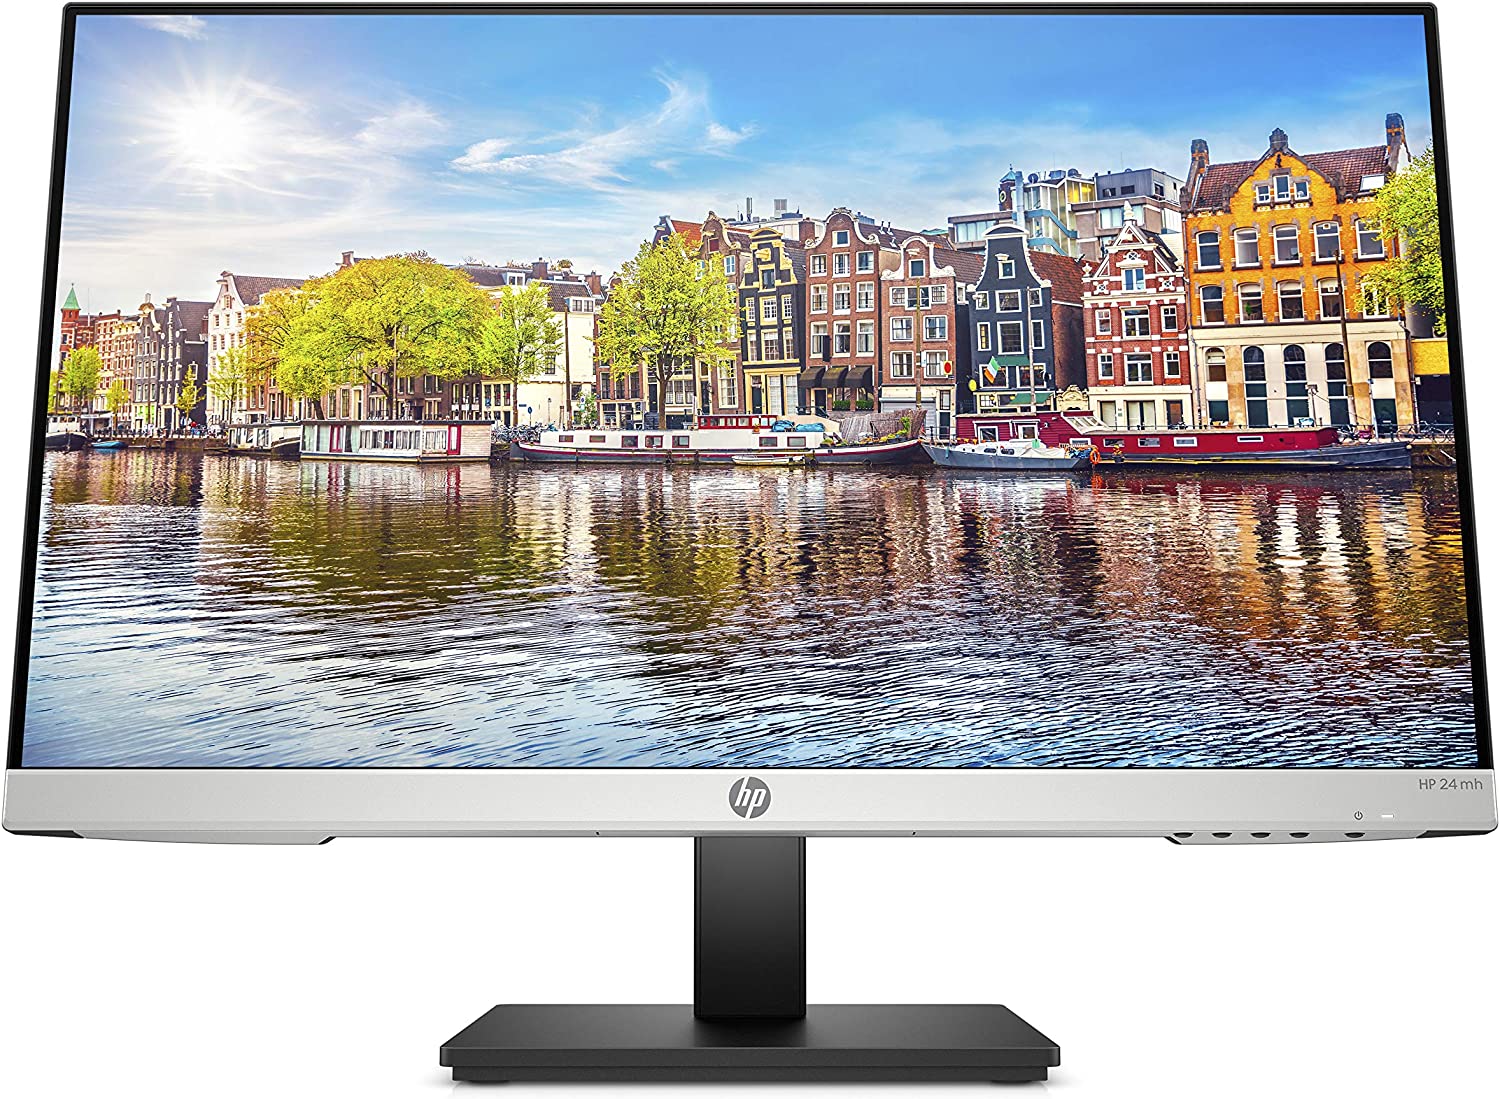 HP 24MH FHD 23.8 INCH MONITOR WITH 2 HDMI PORTS REVIEW